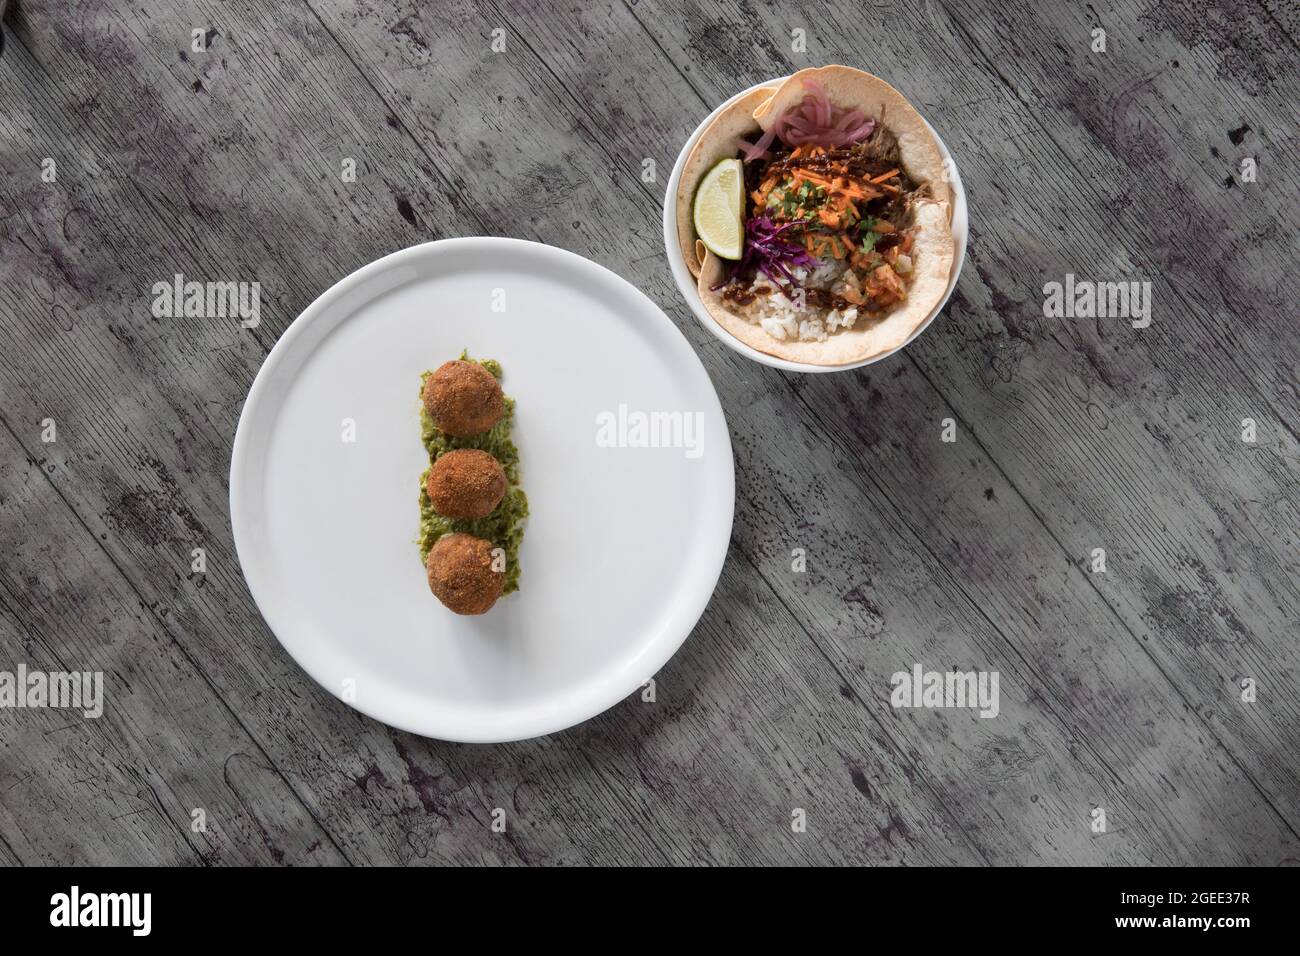 Food dishes composition hi view, above view, creative contemporary concept mediterranean set Stock Photo